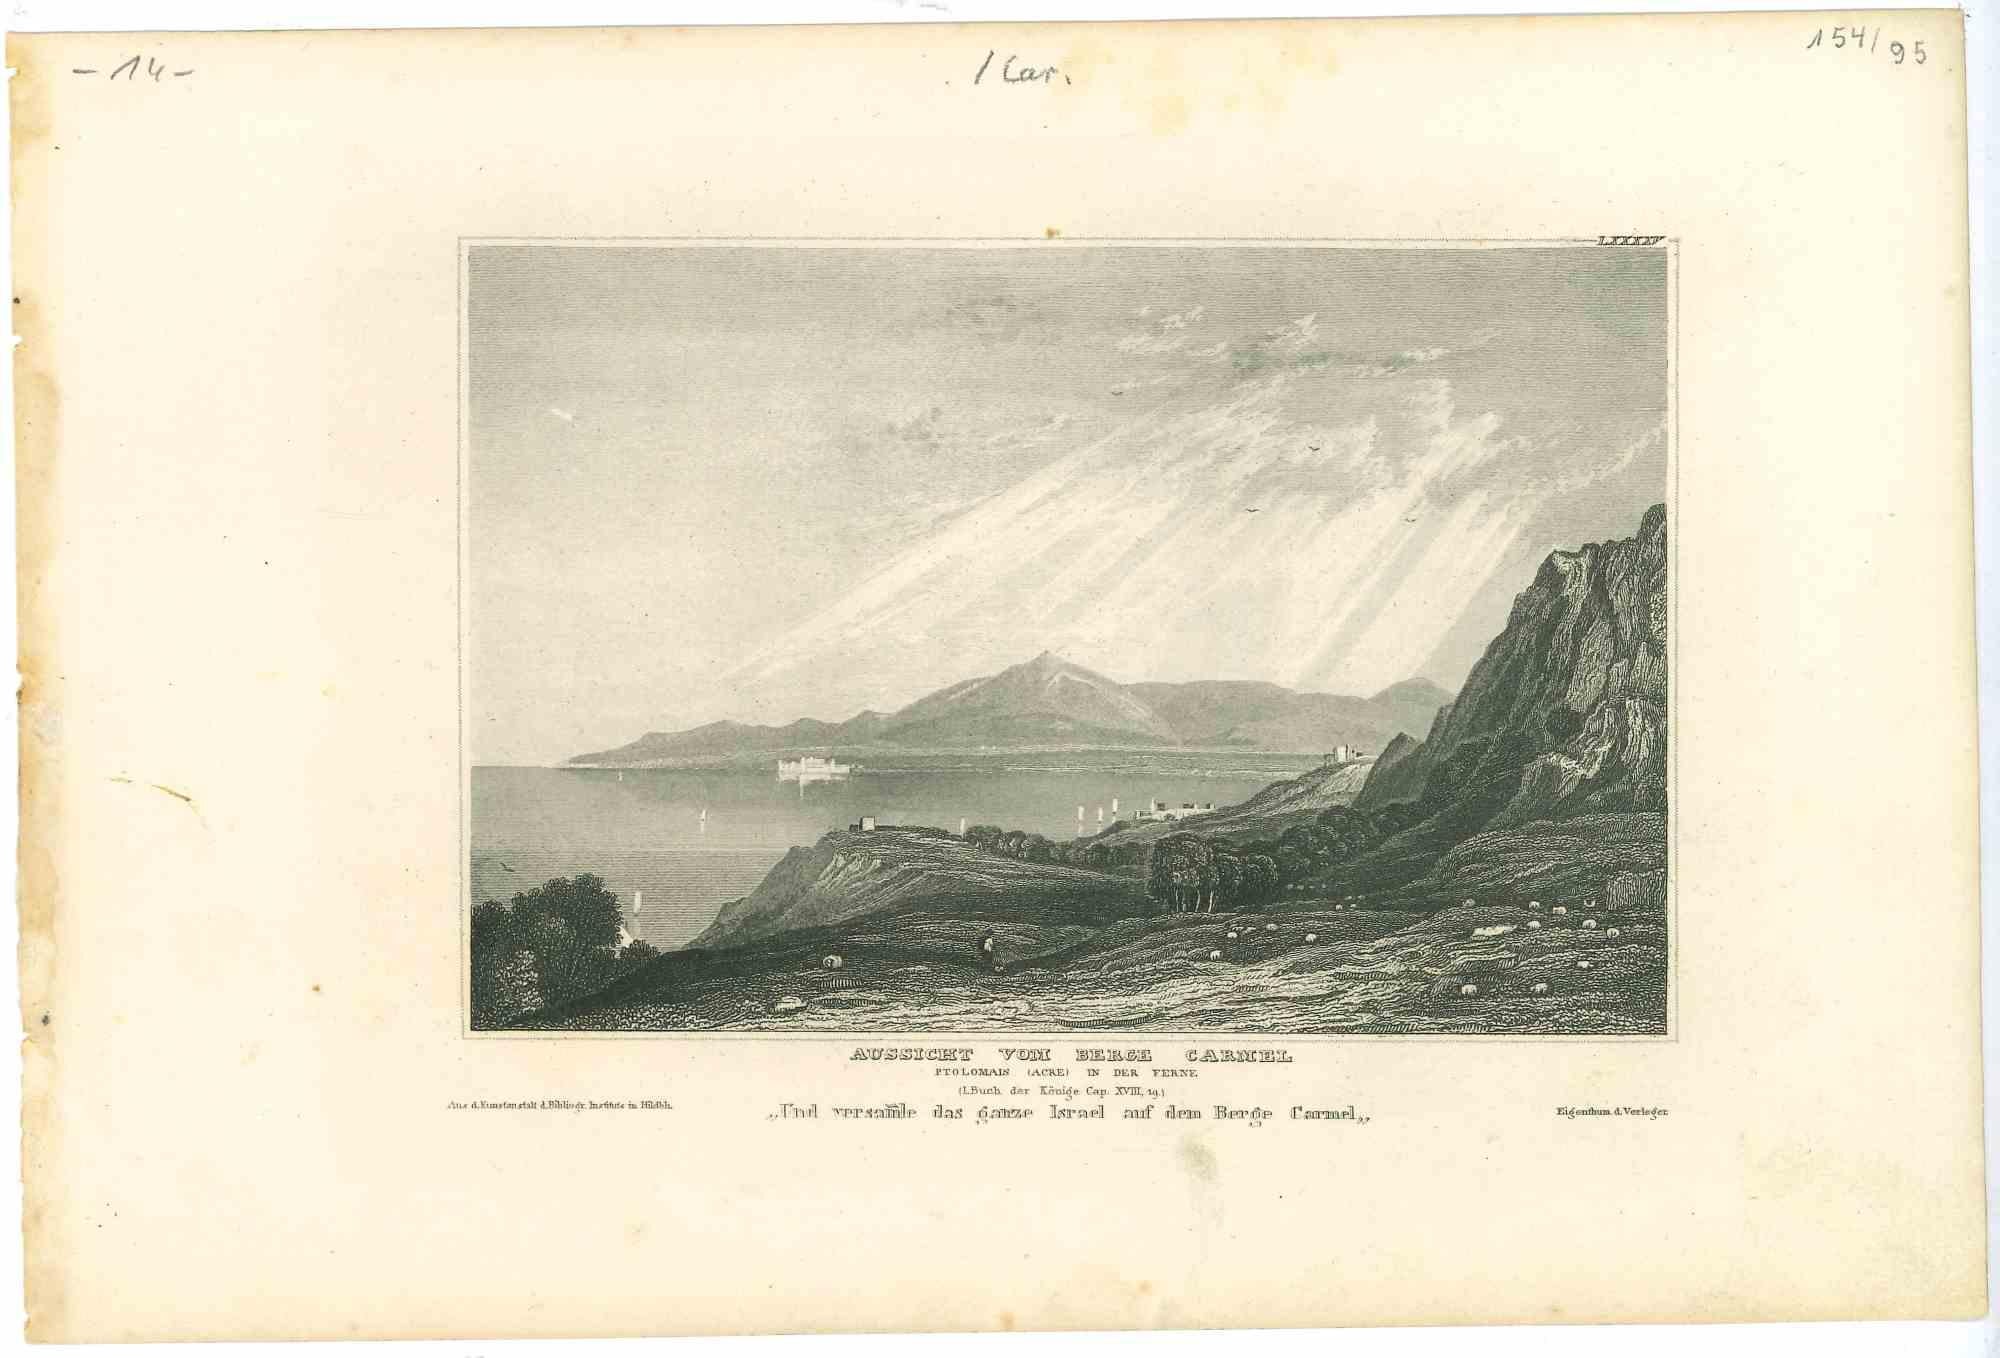 Ancient View from the Karmel Mountains - Original Lithograph - Mid-19th Century